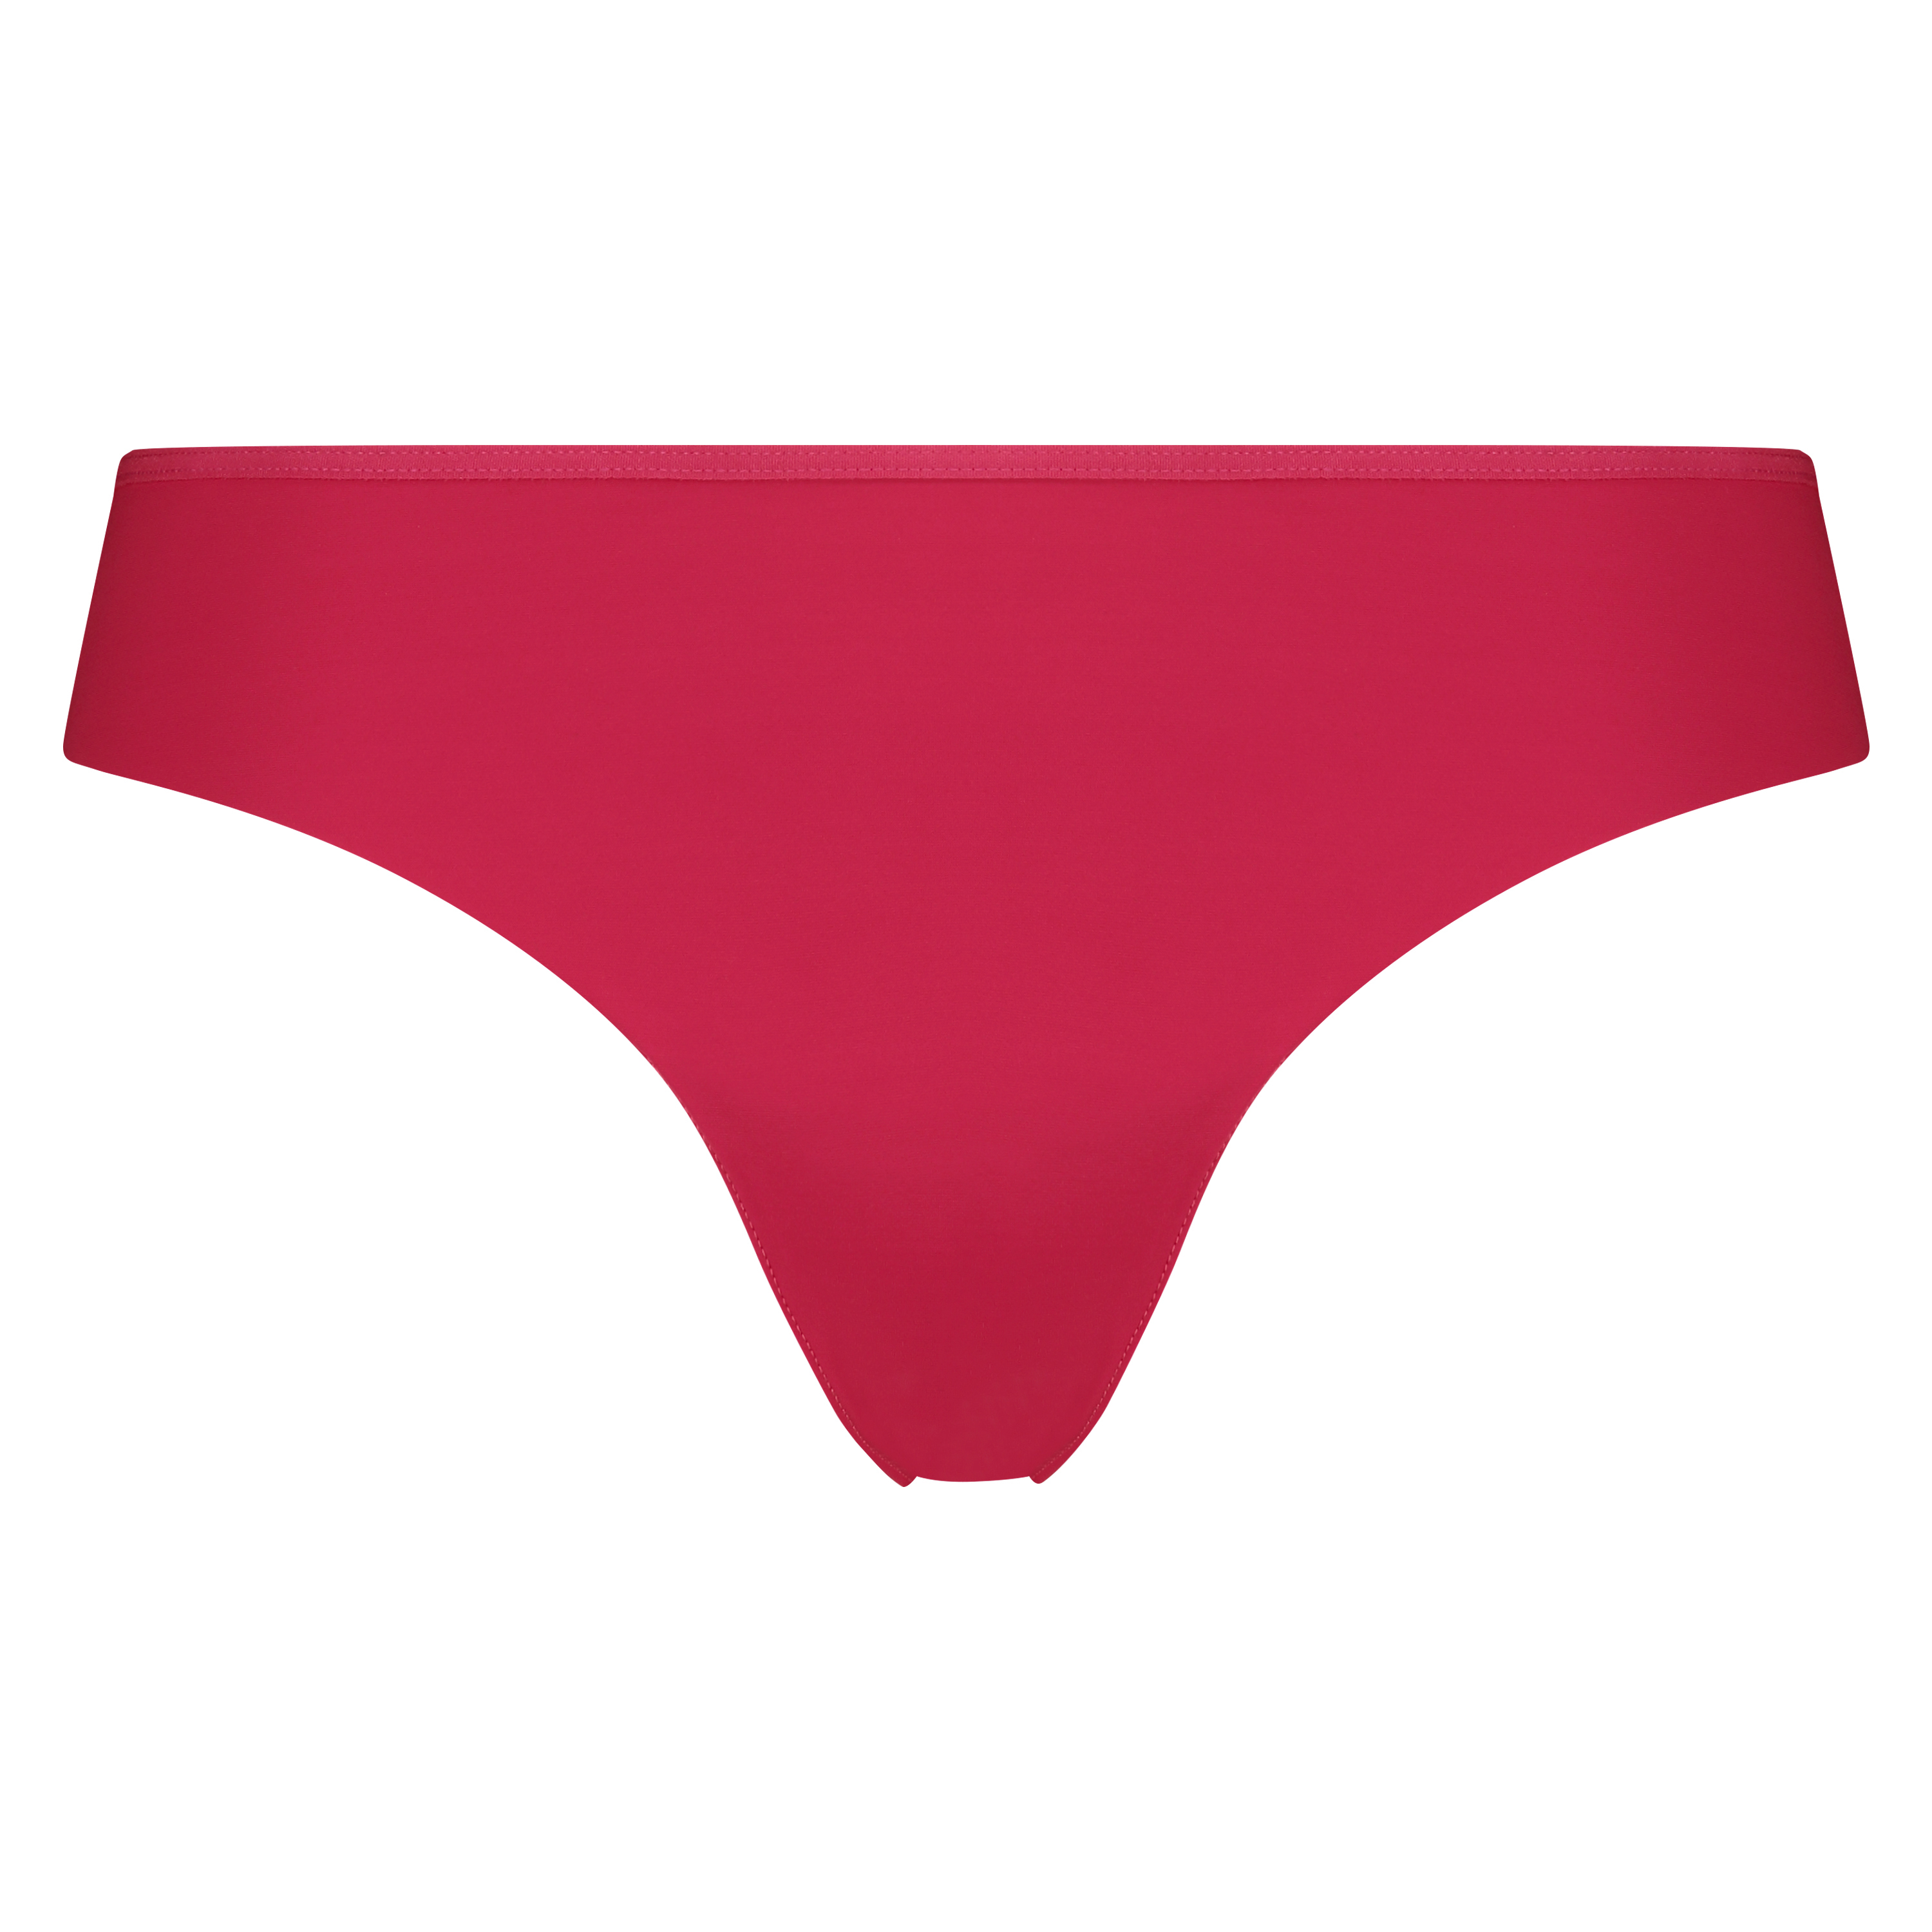 Lace Back Invisible Thong for €6.99 - Thongs - Hunkemöller